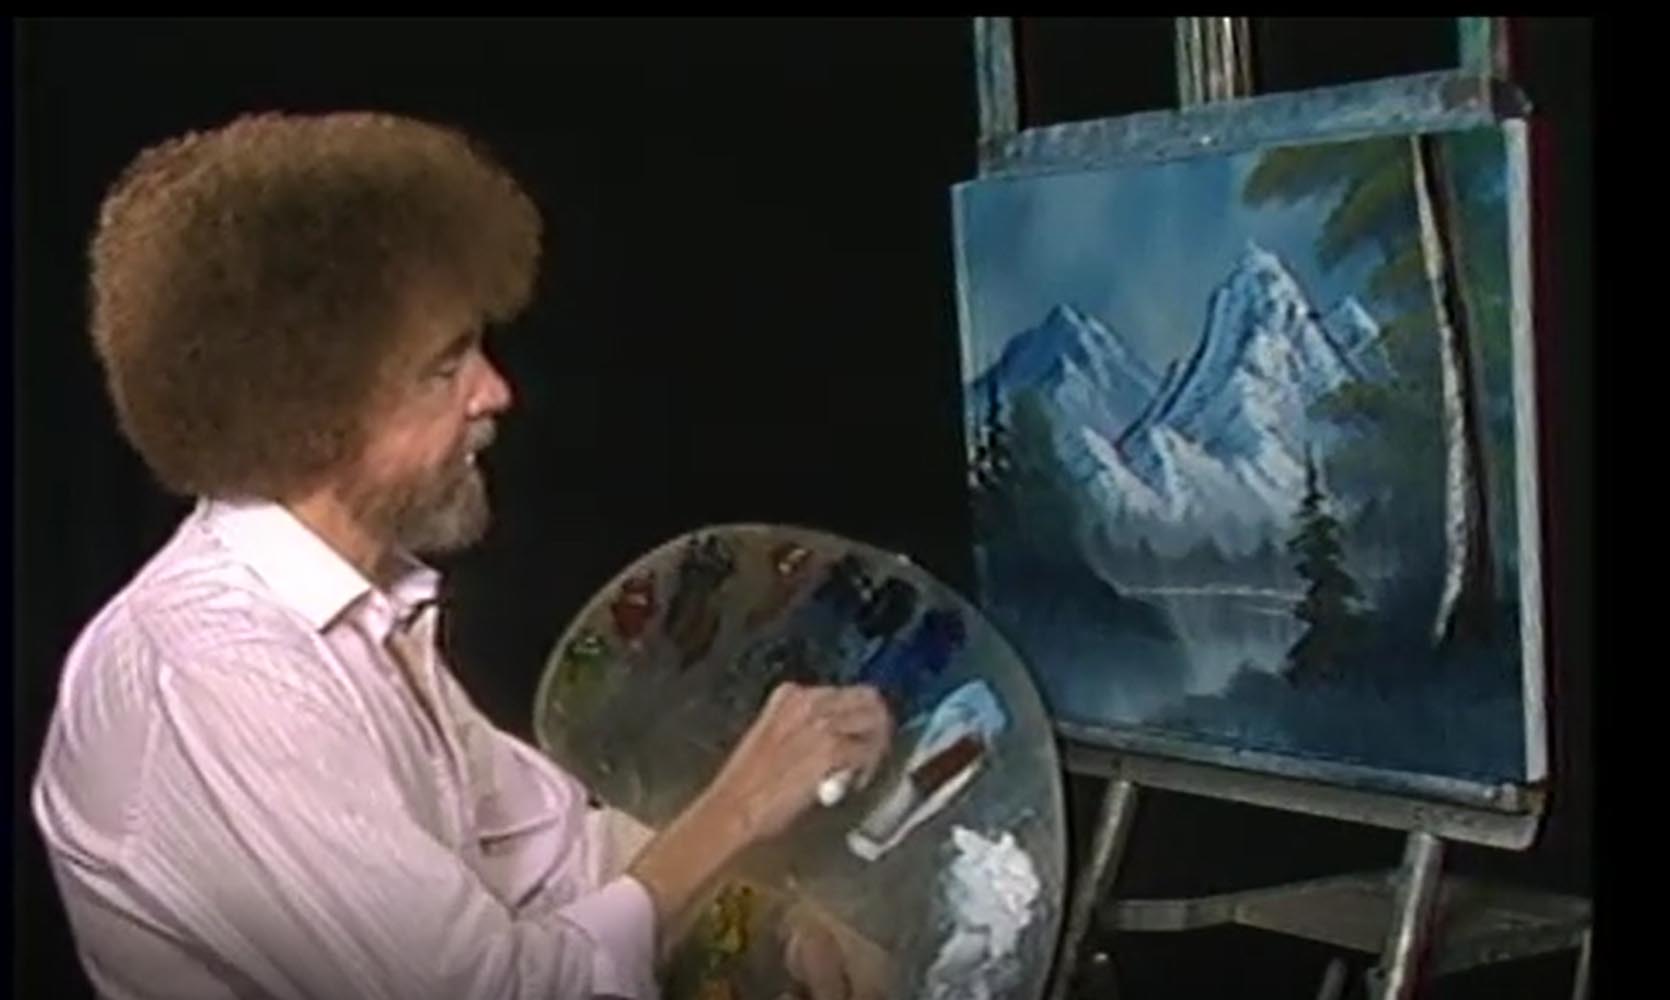 The Tragic Life Story of American Painter Bob Ross, by Sabana Grande, Lessons from History